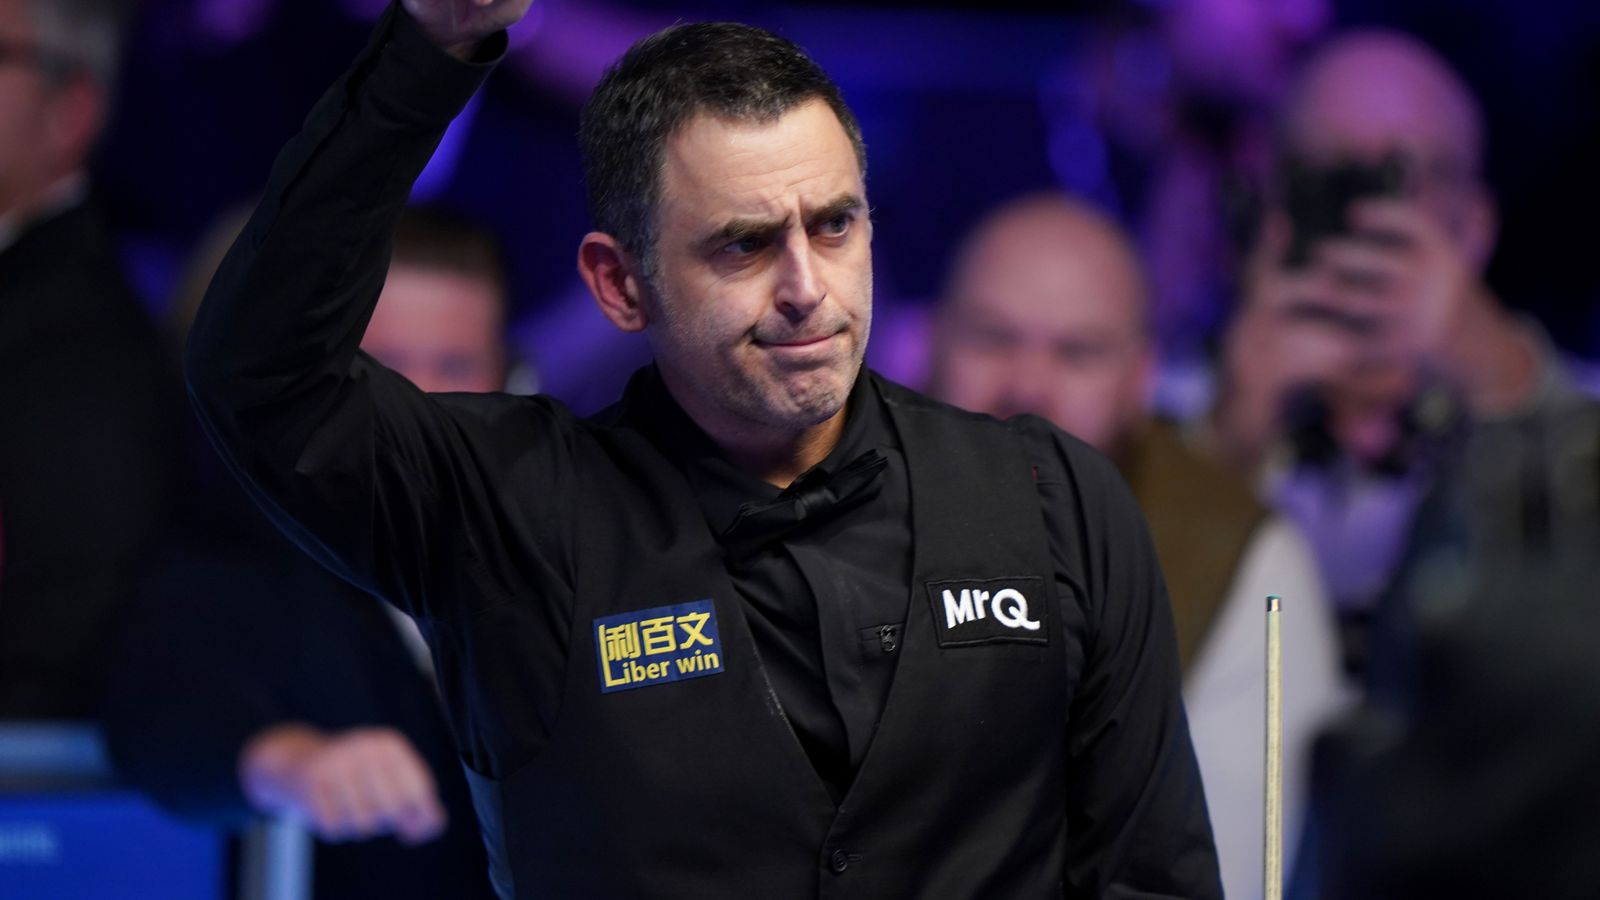 Ronnie O'Sullivan questions his own game ahead of World Championship